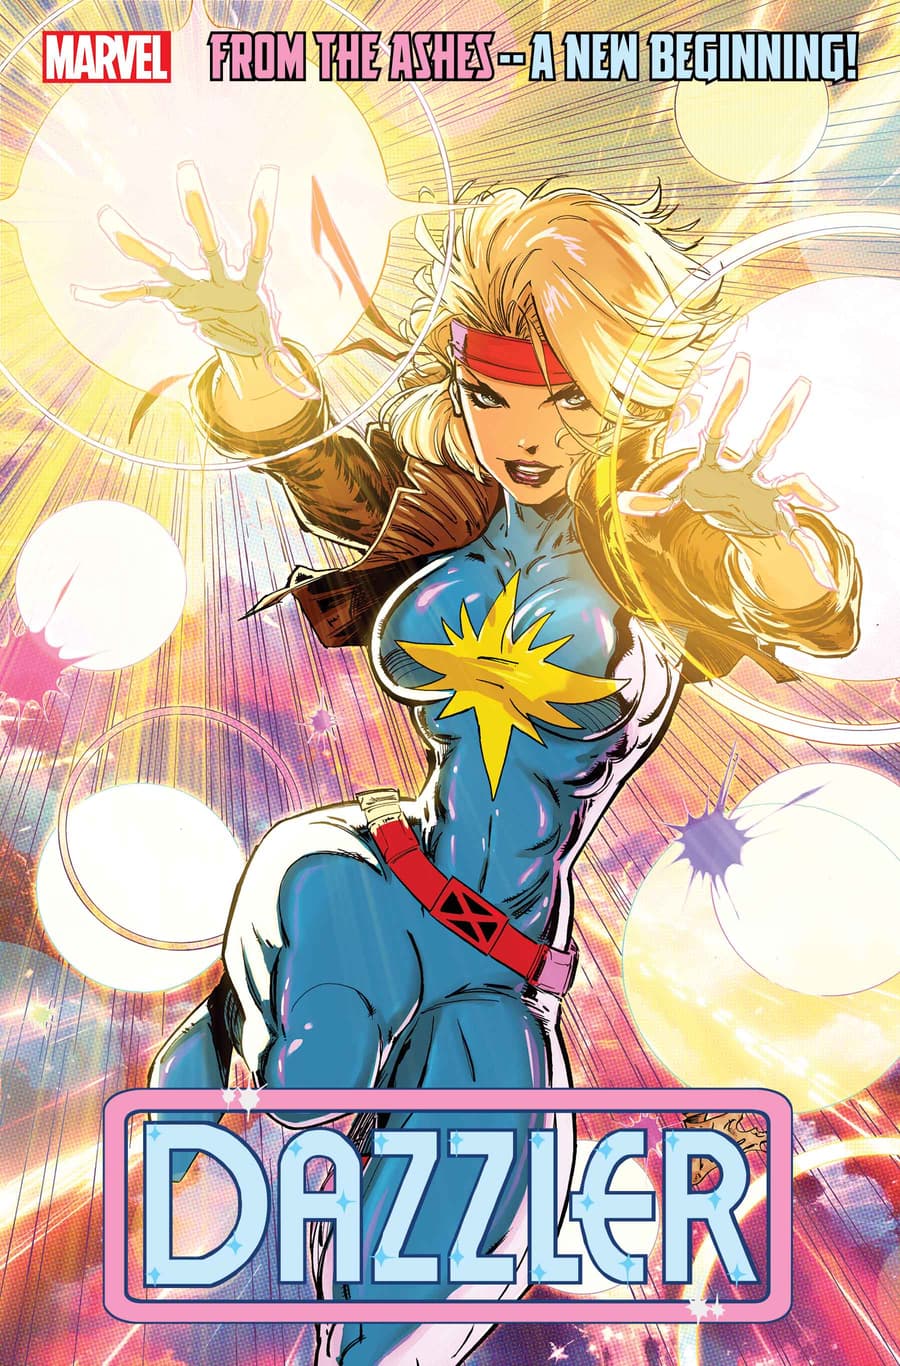 DAZZLER #1 Foil Variant Cover by Kaare Andrews